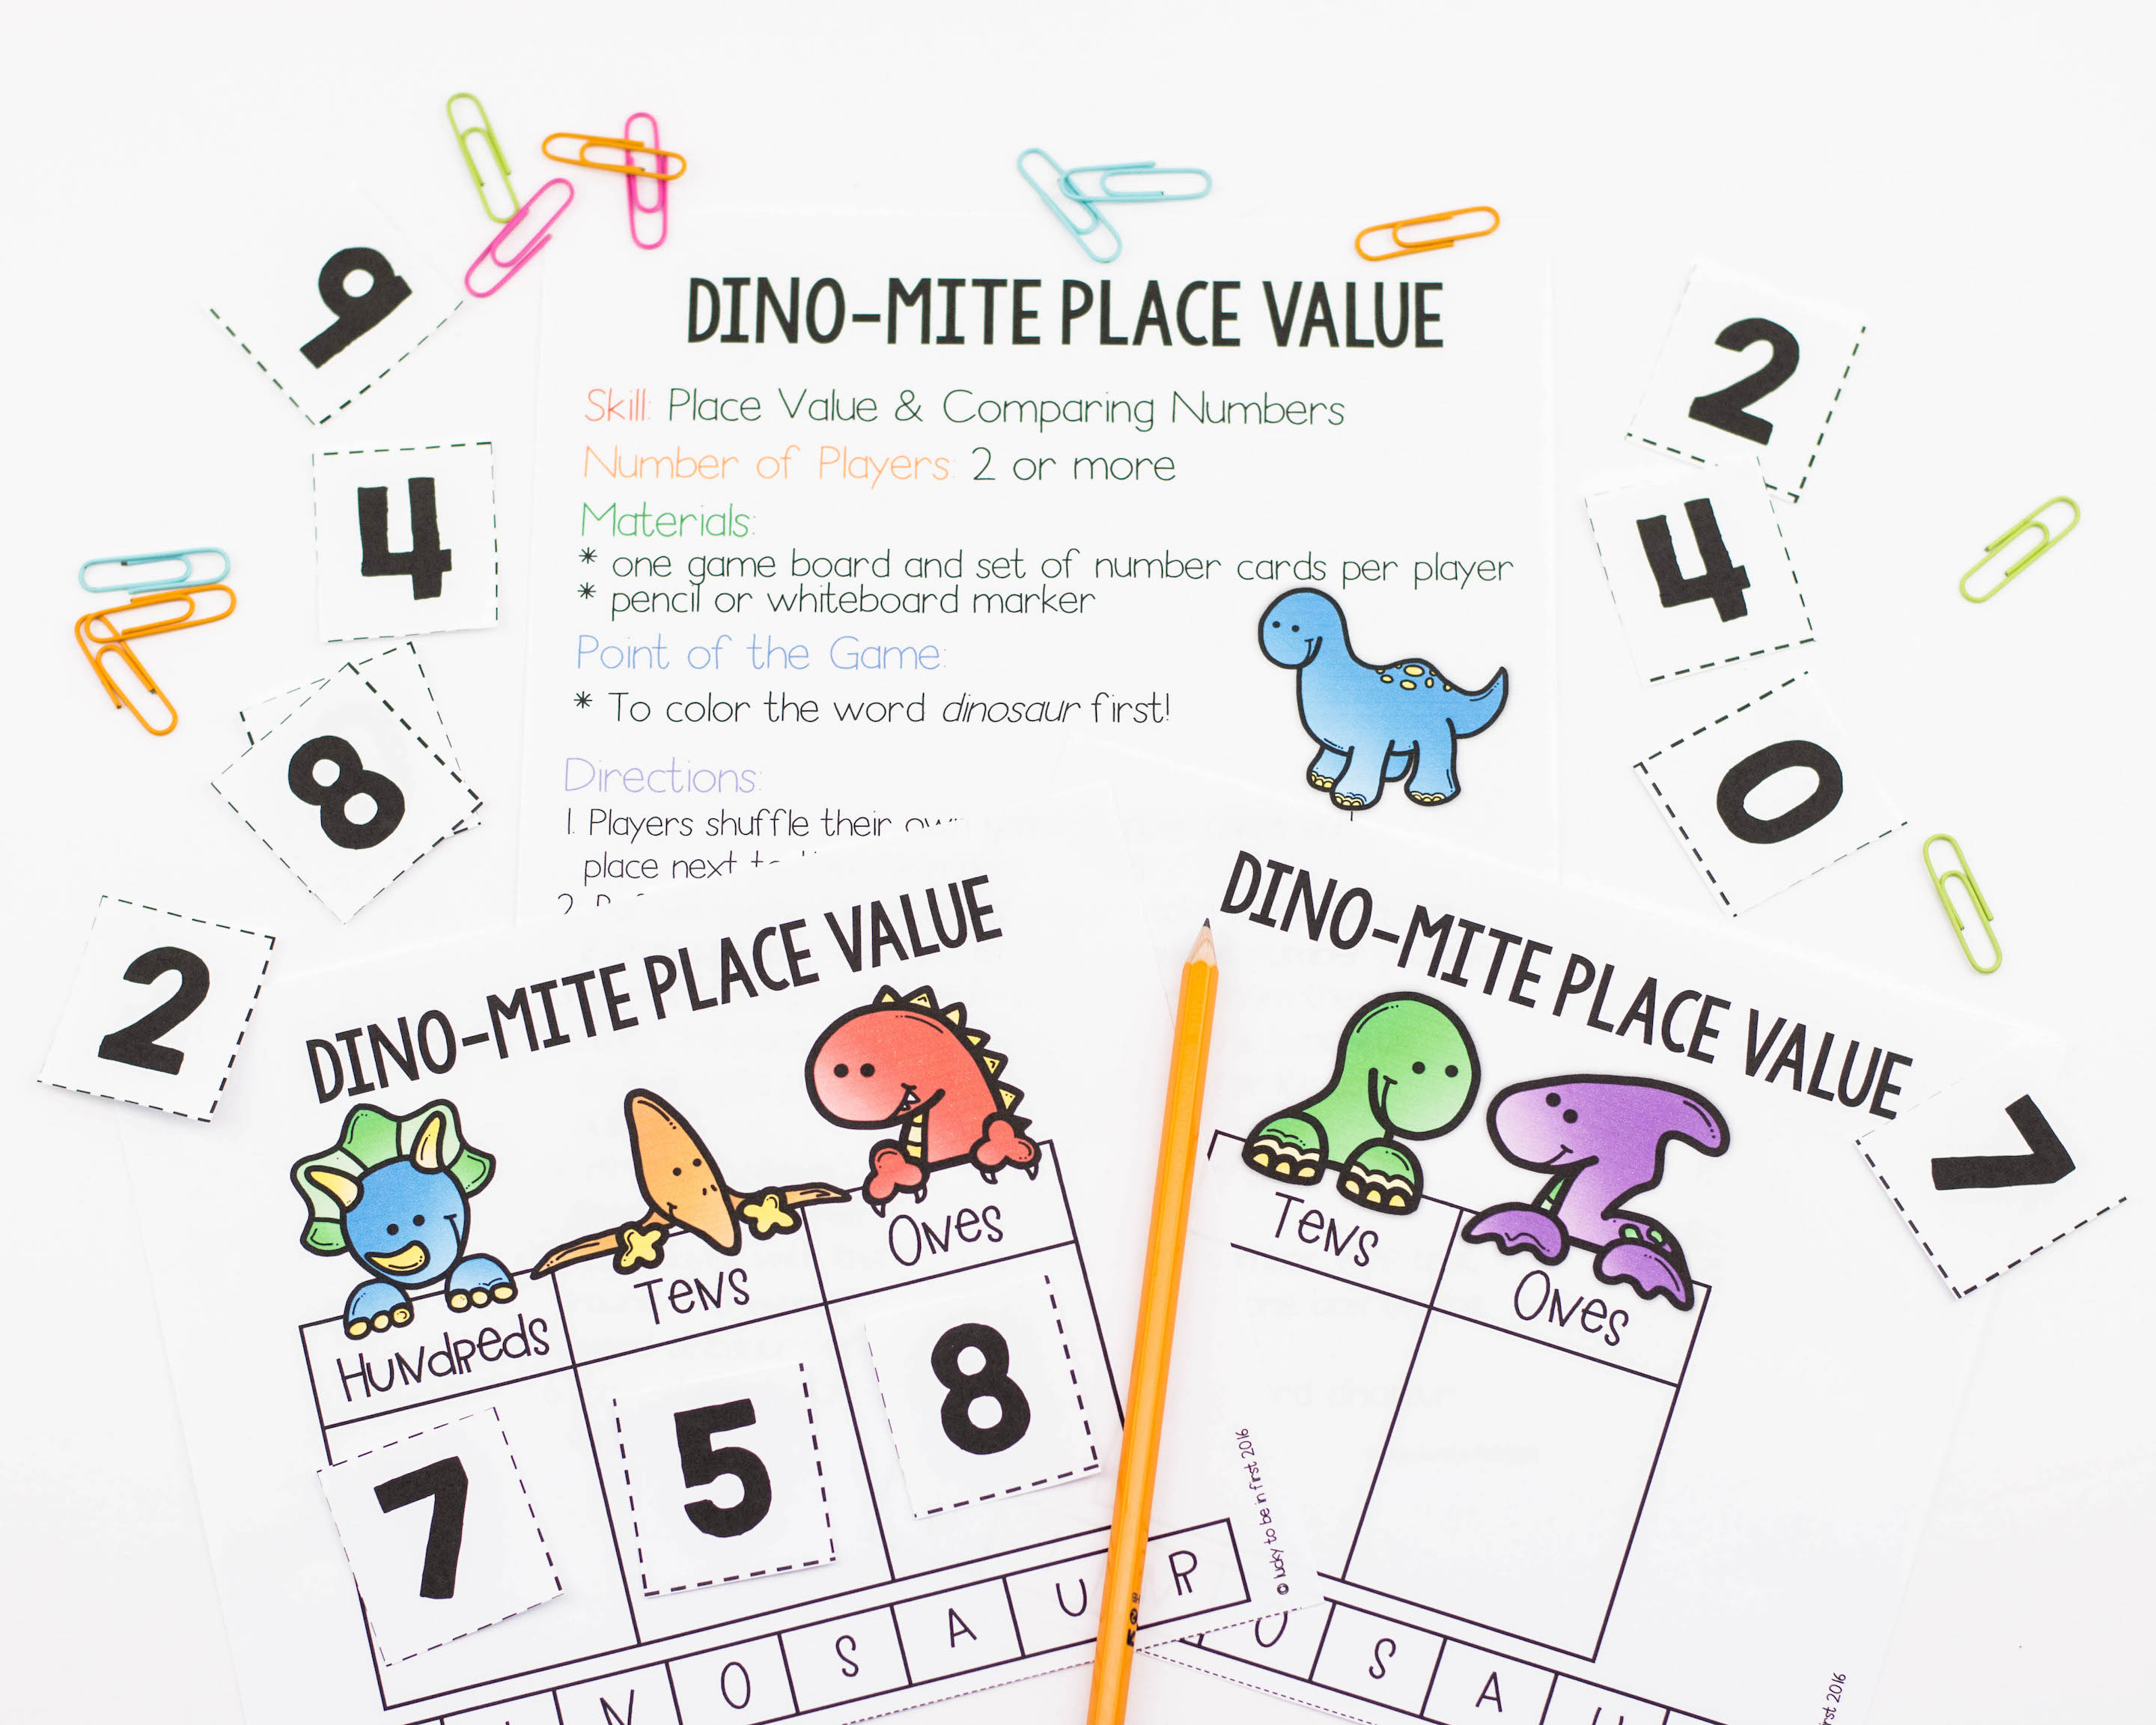 dino-mite place value game | Lucky Learning with Molly Lynch 